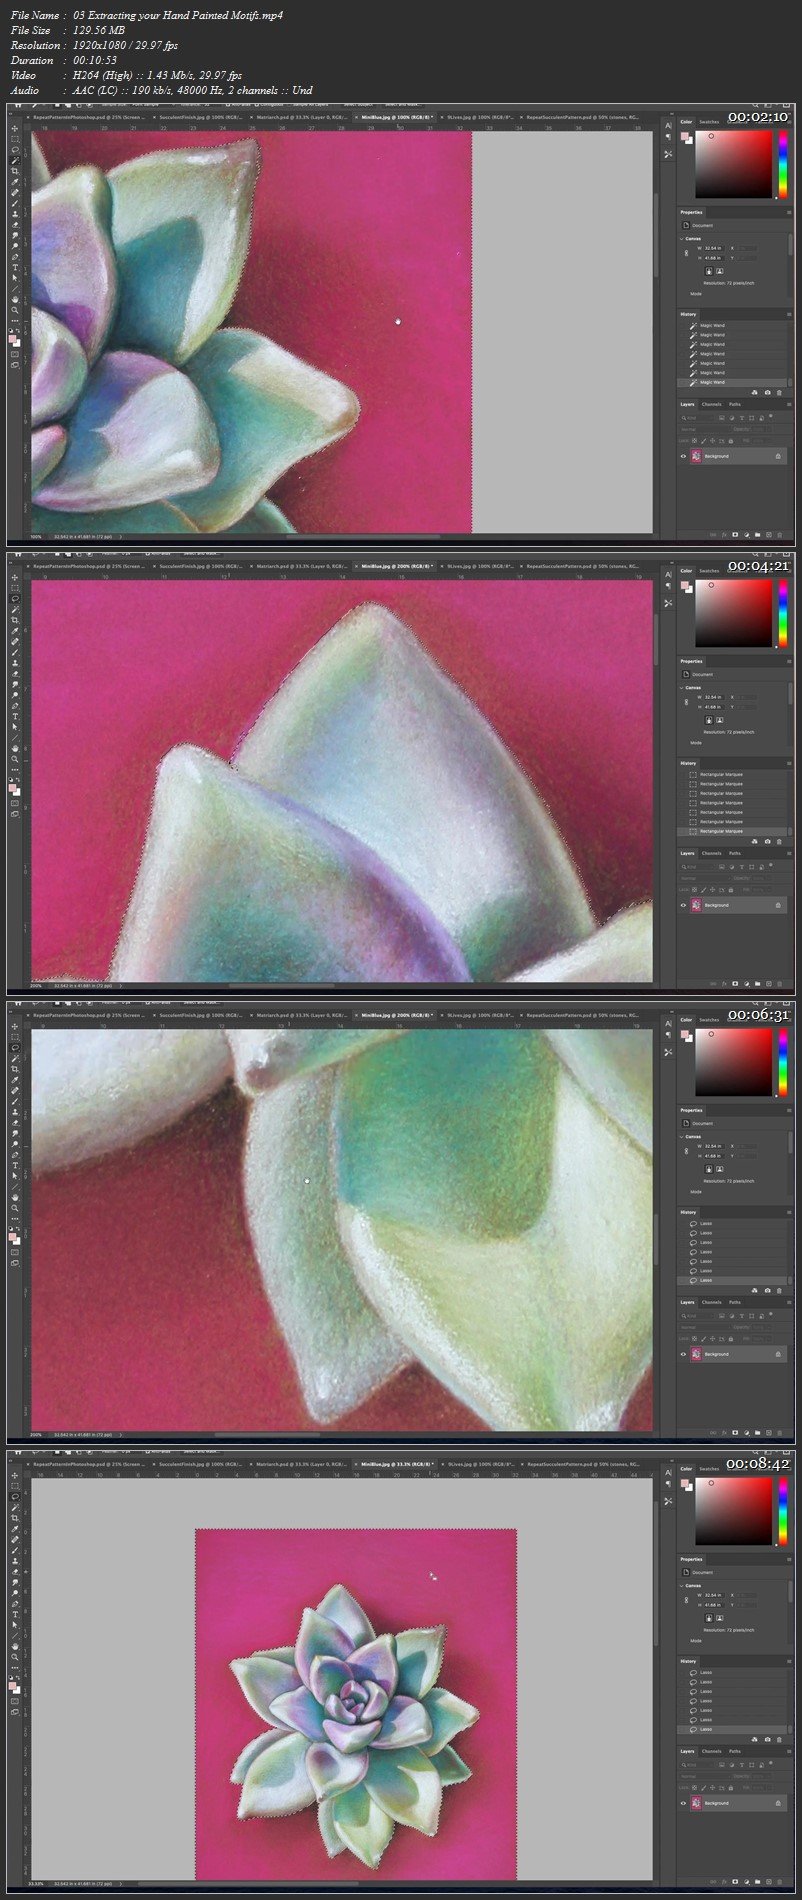 Create a Repeat Pattern in Photoshop from Hand Painted Motifs